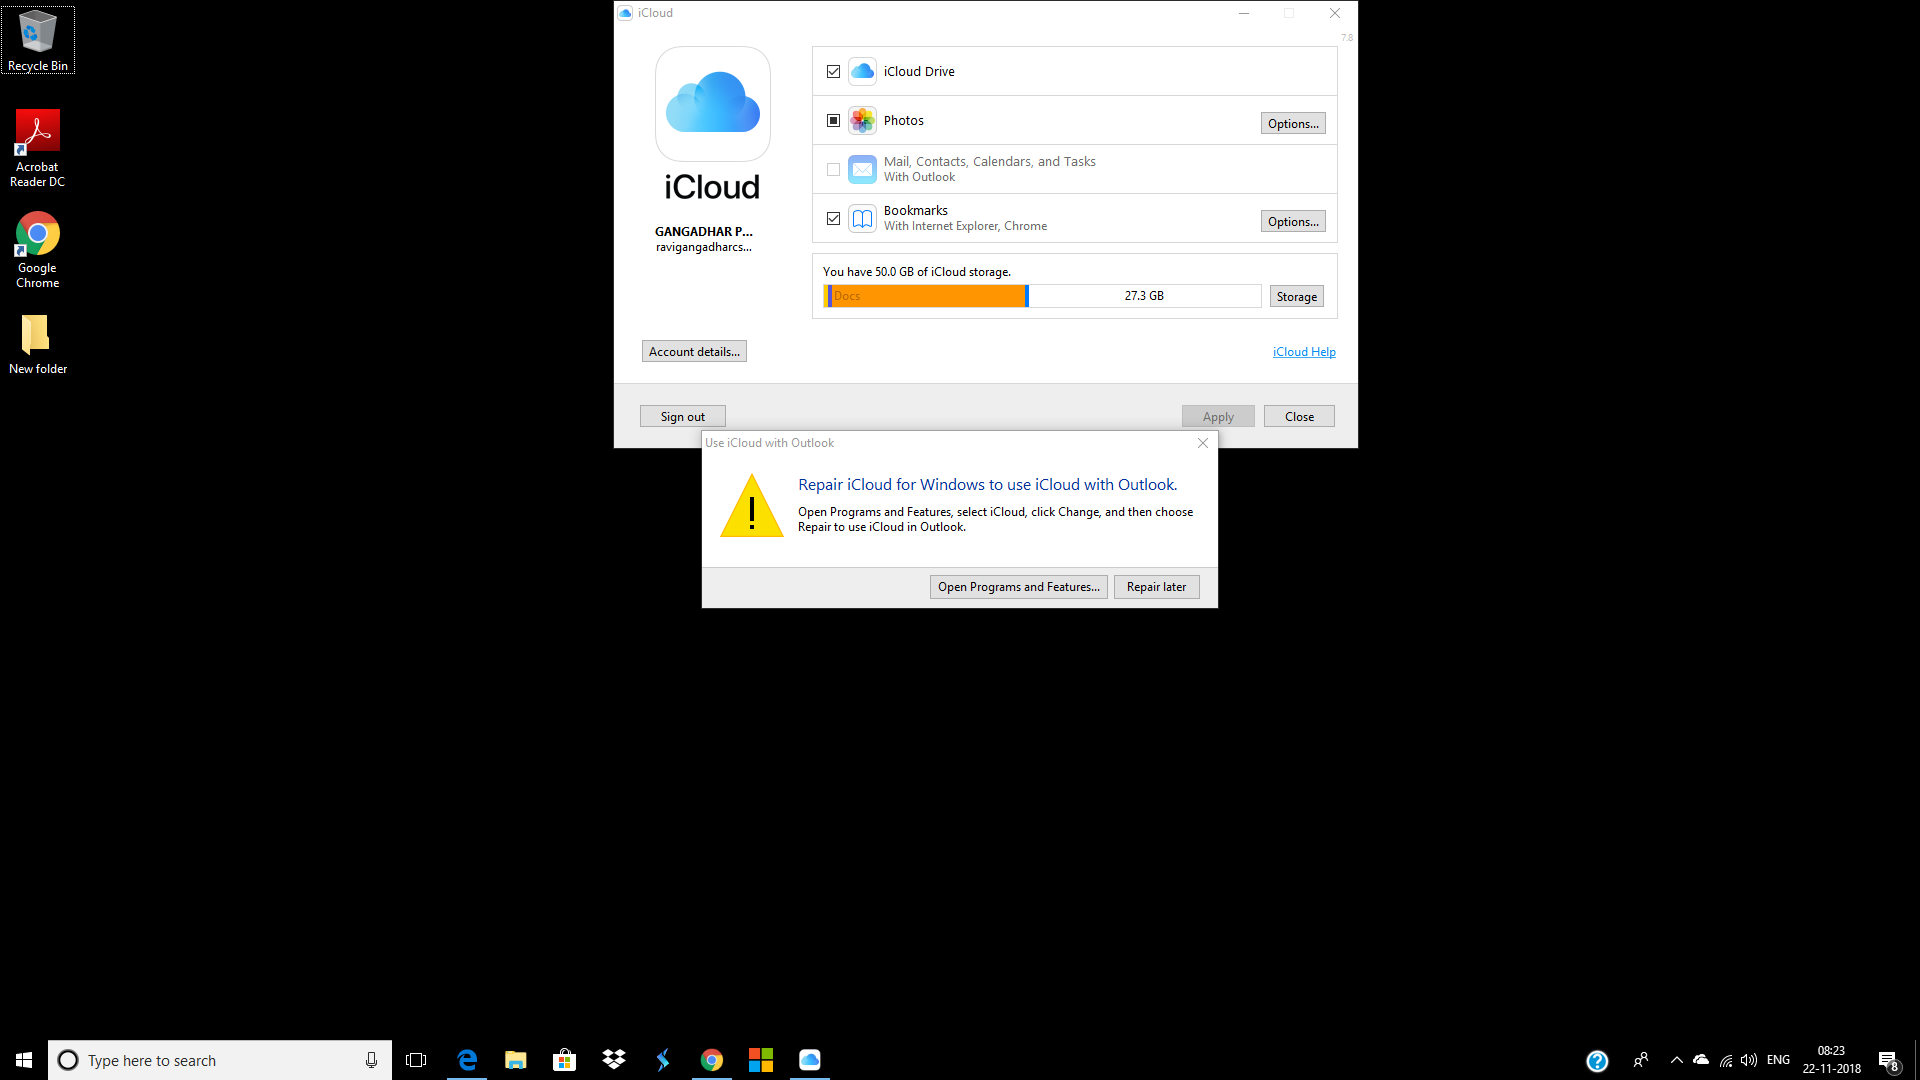 Installation problem of Icloud in windows 10-outlook error 9bcbfd83-a208-433b-8127-92fb577f48d2?upload=true.png